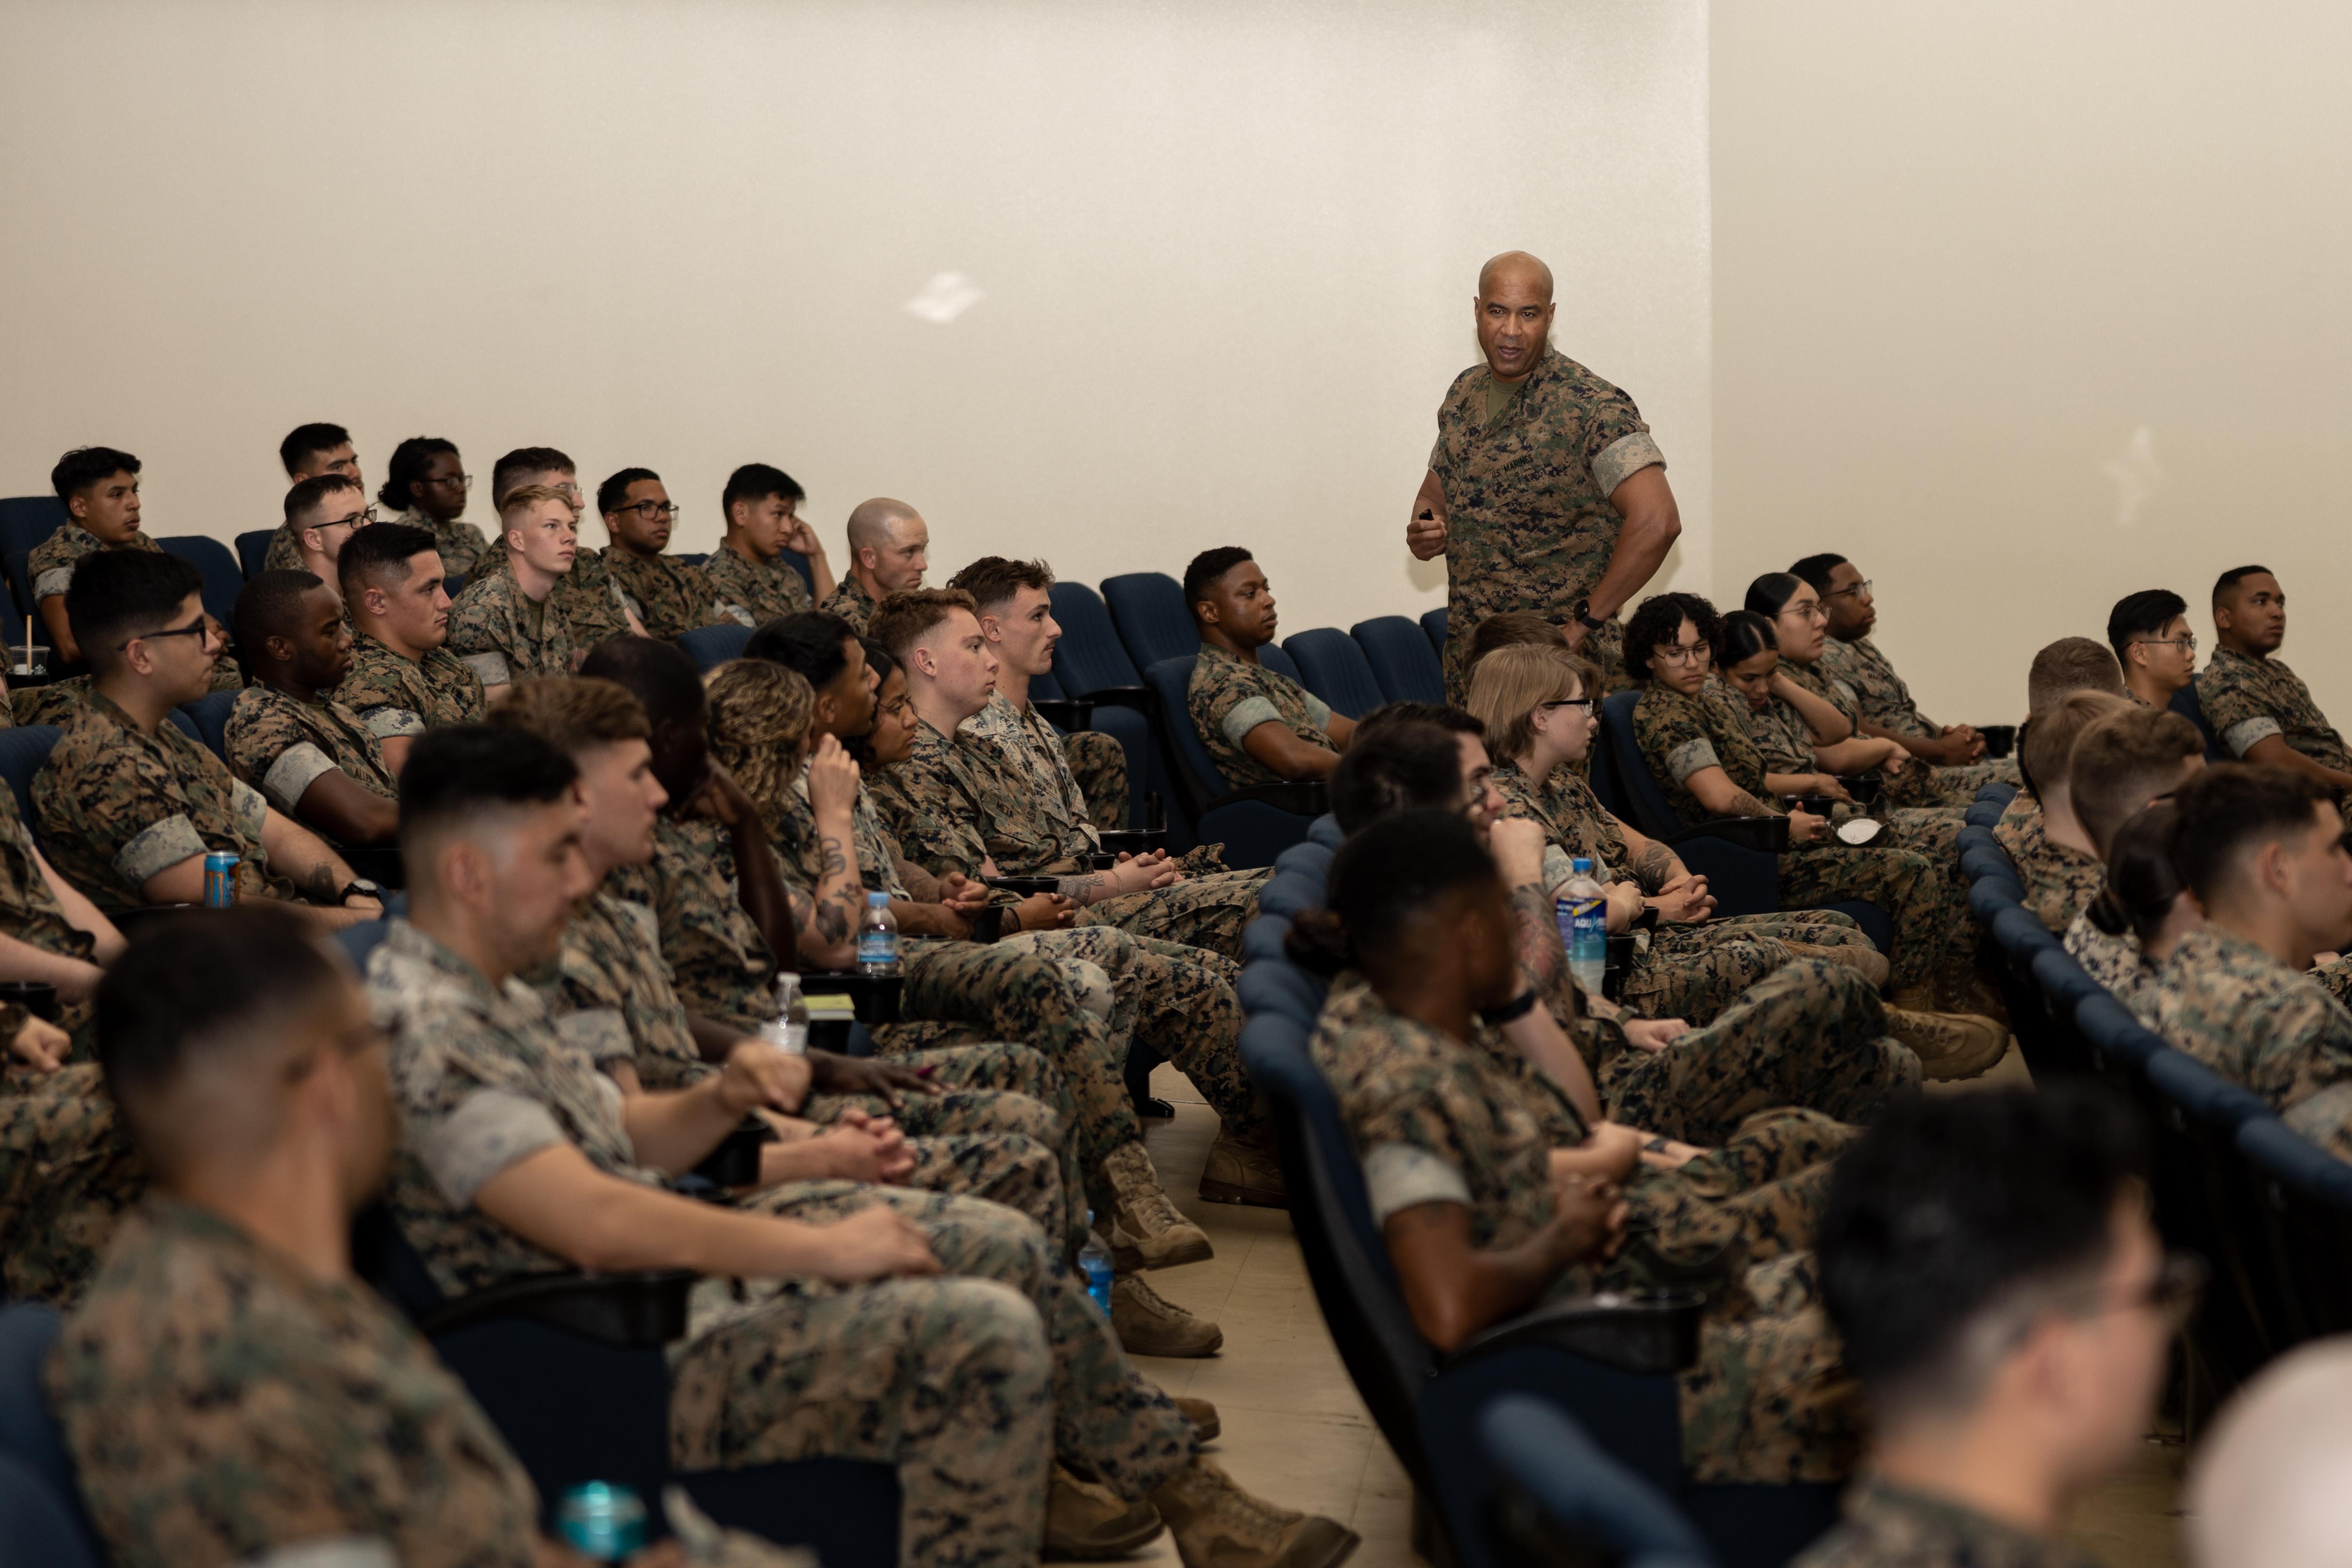 U.S. Marine Corps Master Sgt. Thomas Wallace, a career recruiter with Marine Corps Recruiting Command, informs Marines about recruiting duty at Camp Kinser, Okinawa, Japan, April 18, 2023. The purpose of the brief was to provide firsthand knowledge of recruiting duty and expand awareness of the opportunities associated with recruiting to those who are eligible. (U.S. Marine Corps photo by Lance Cpl. Sydni Jessee)